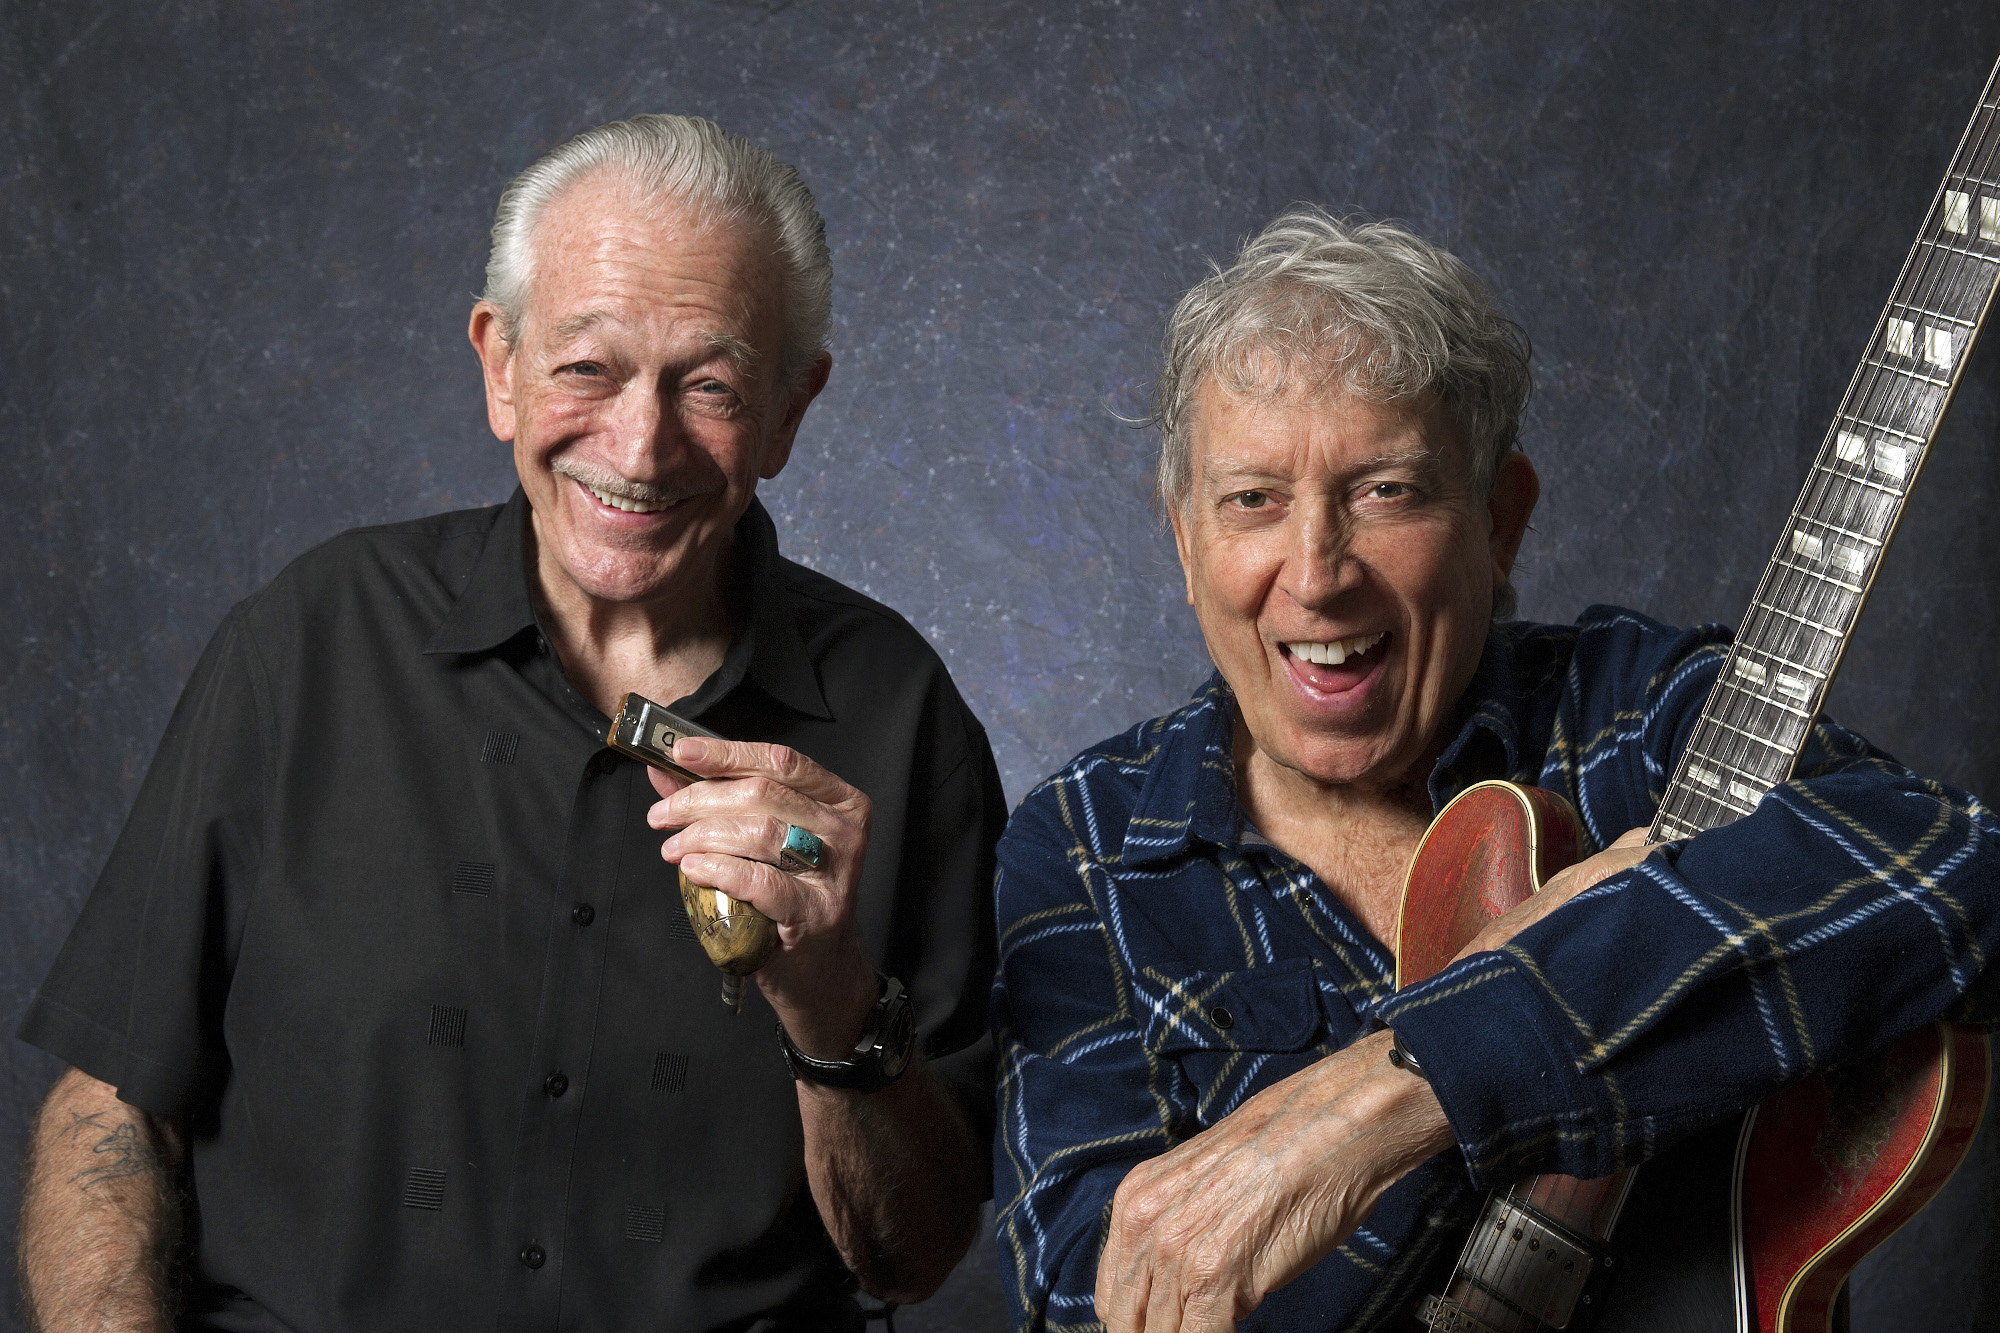 Experience of Elvin Bishop and Charlie Musselwhite Shine on ‘100 Years of Blues’